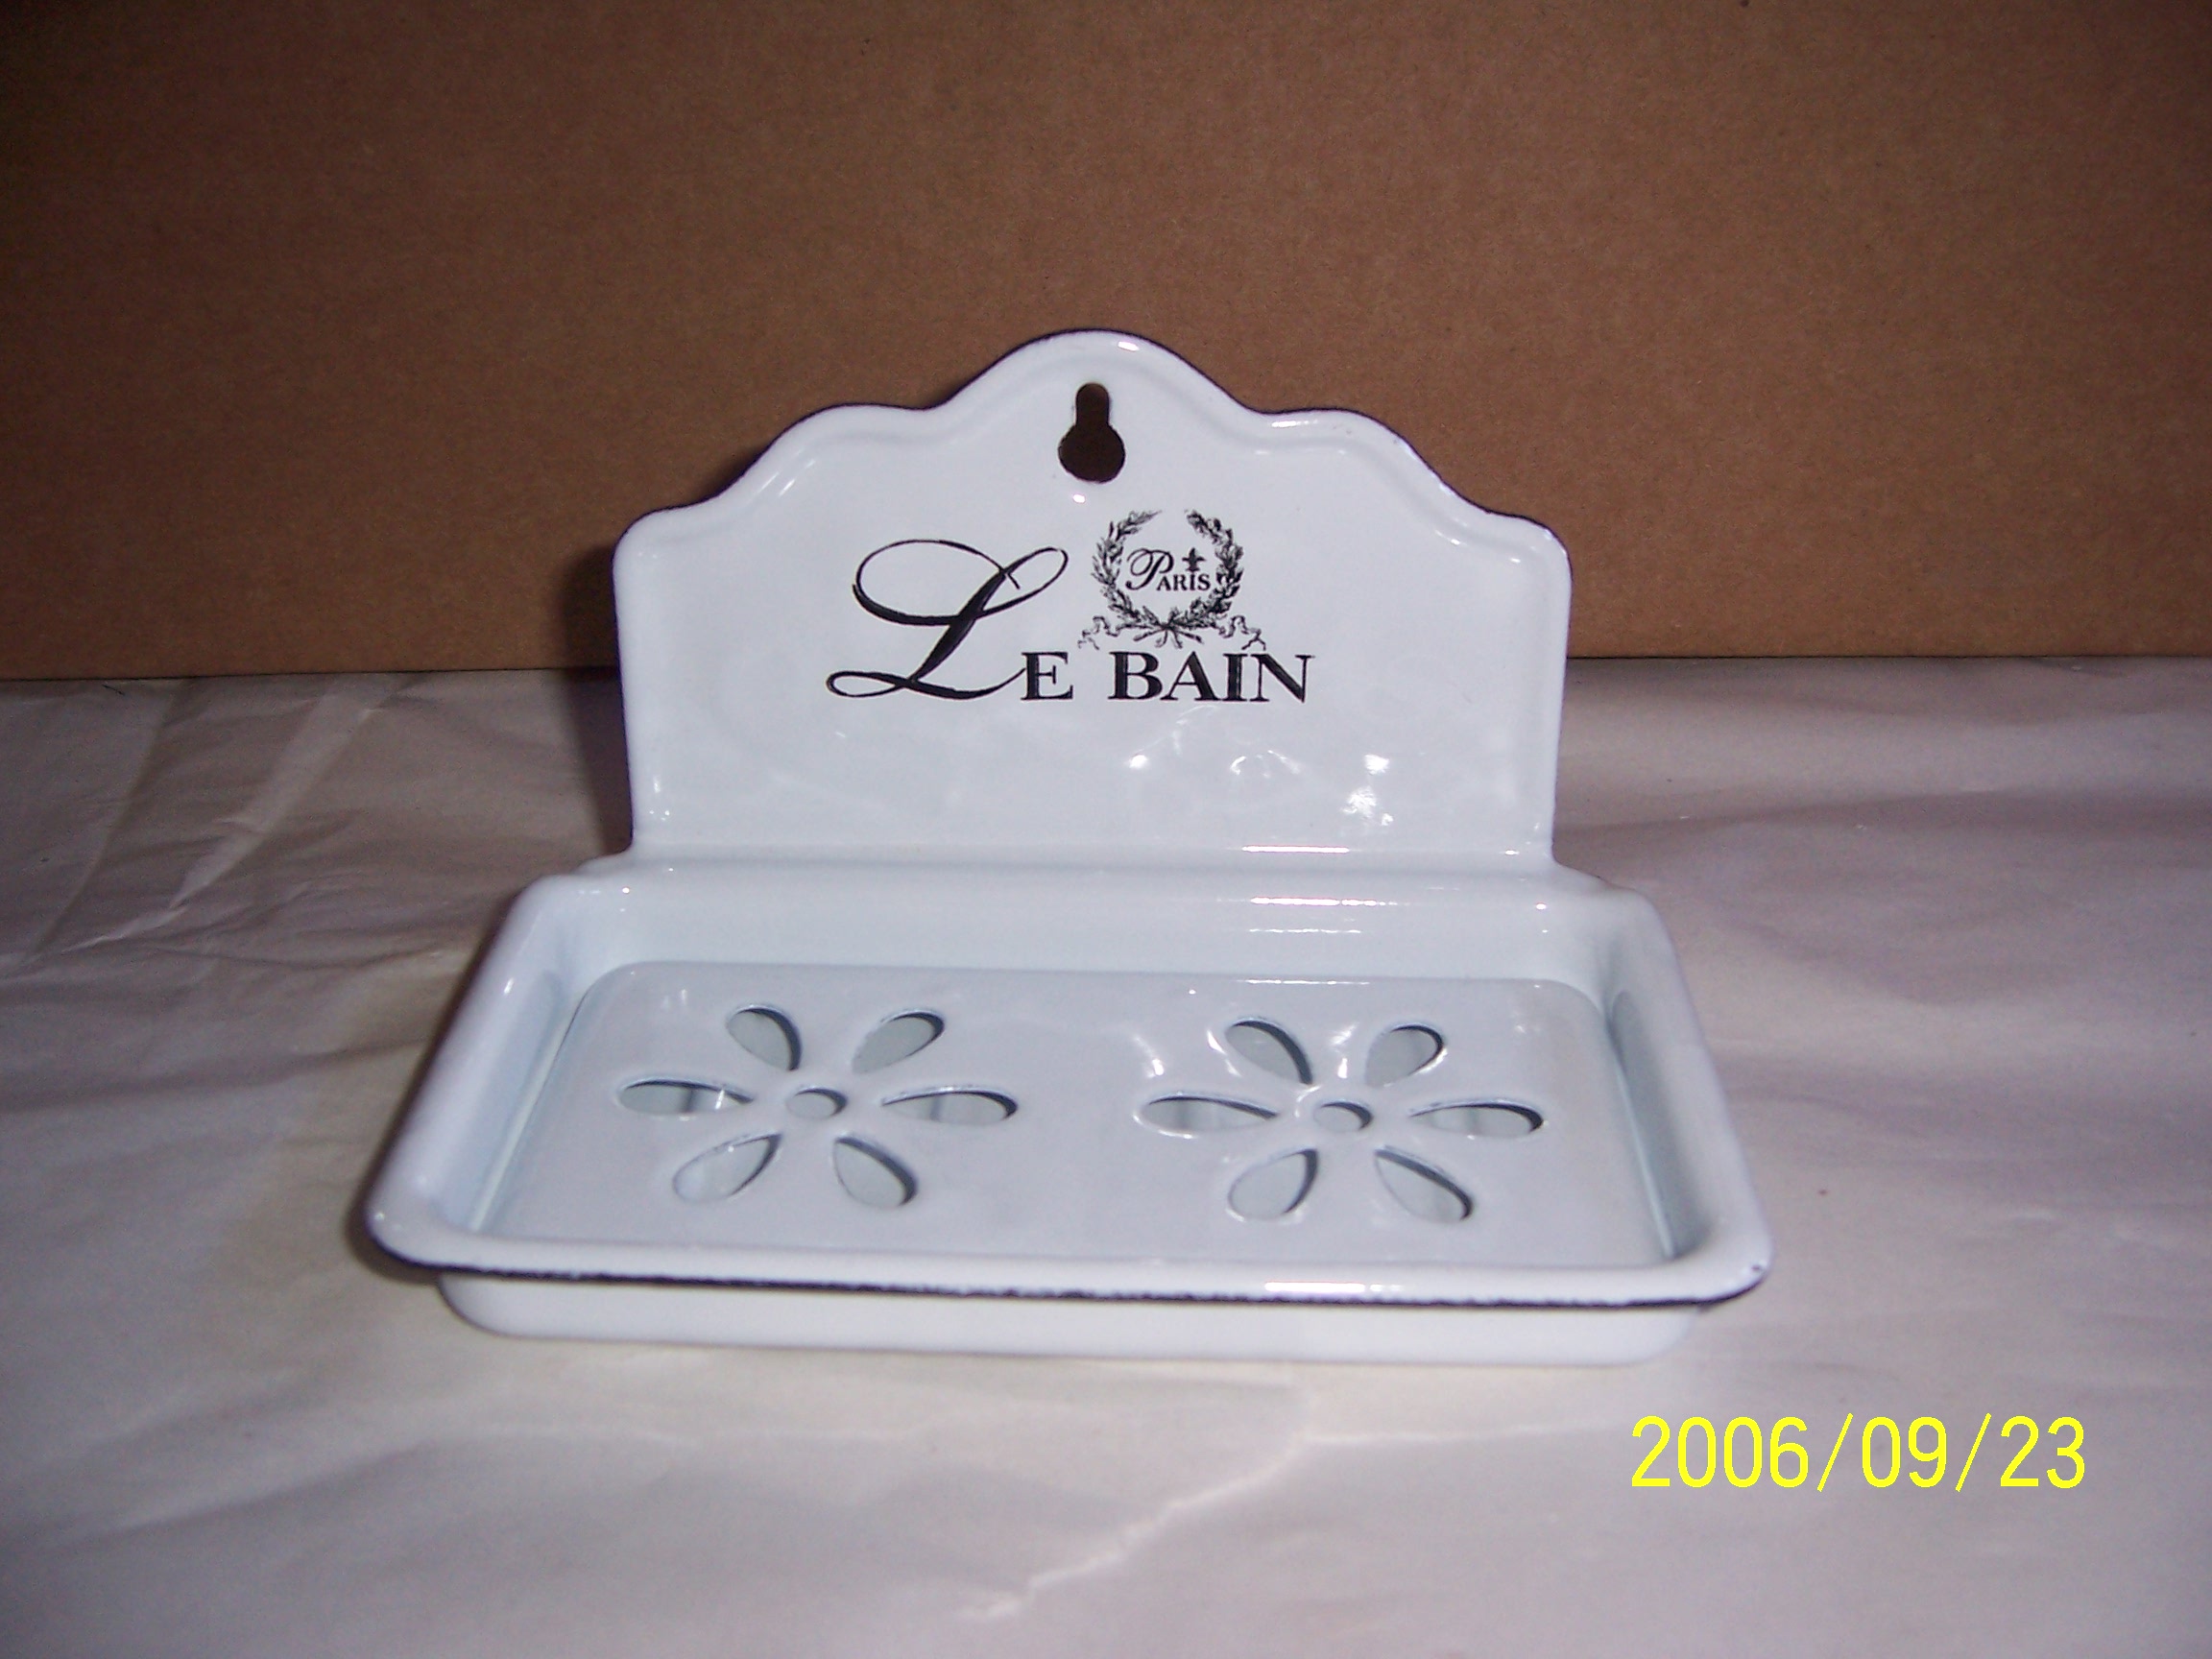 Flower-shaped country soap holder